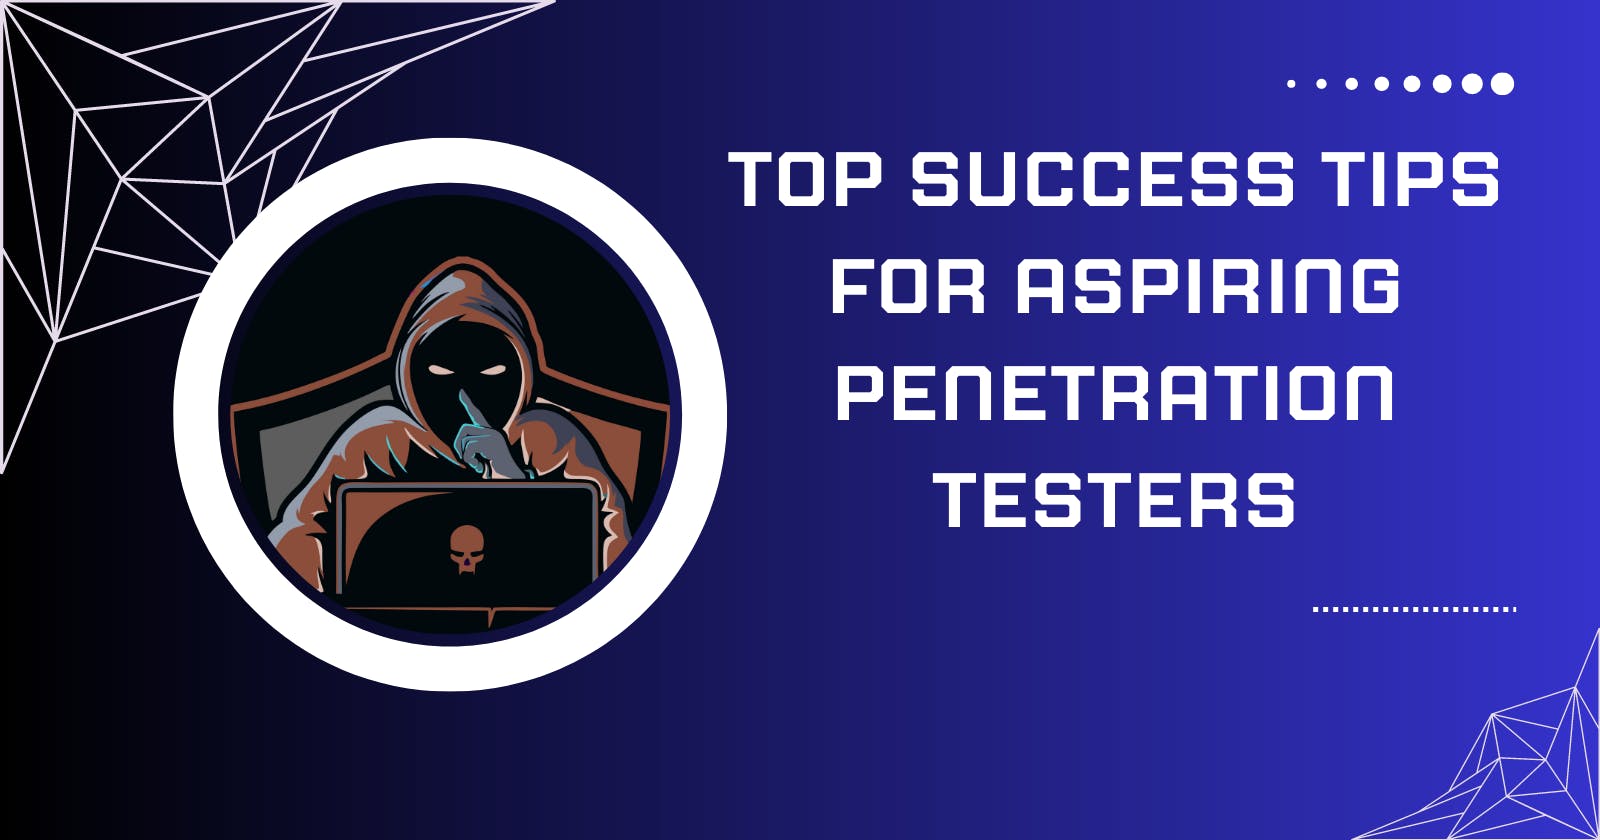 Top Success Tips for Aspiring Penetration Testers: Your Guide to Excelling in the Field